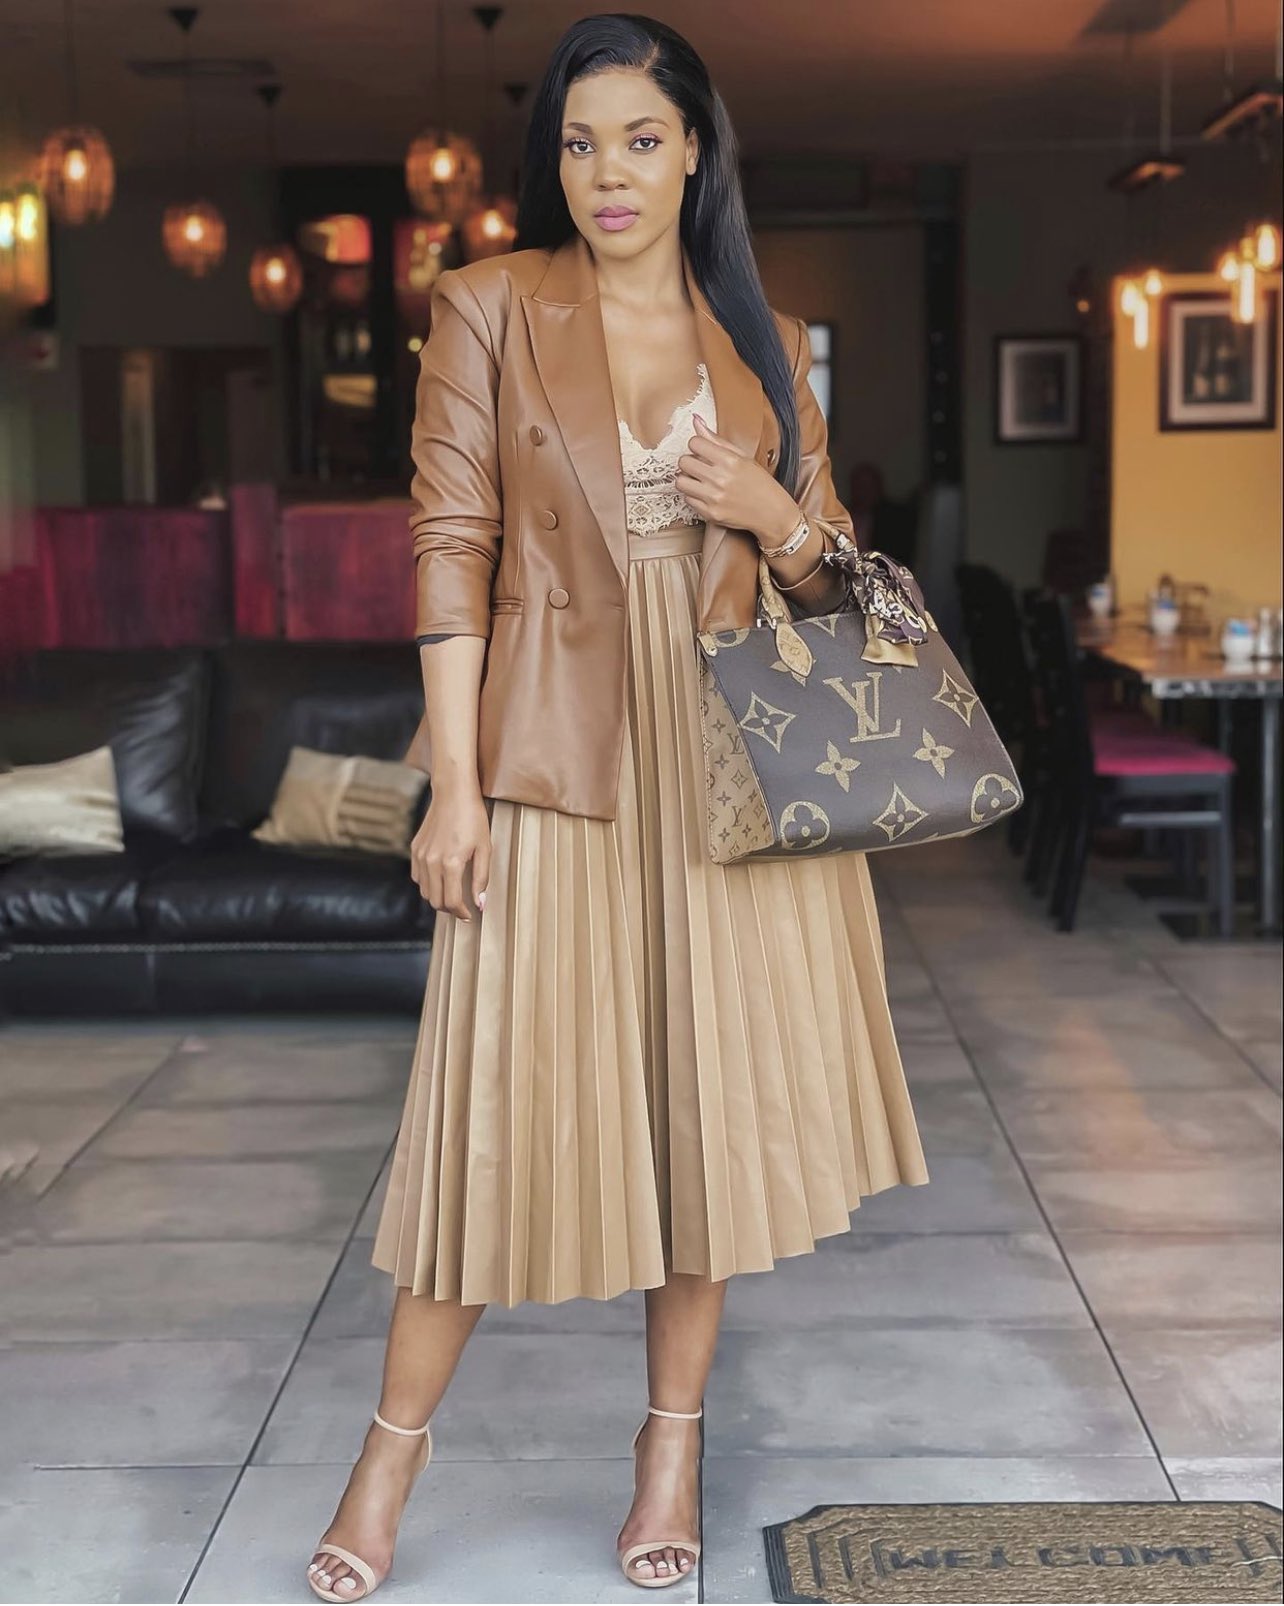 IG: Sinegugulethu on X: If there's one clothing item I abuse in